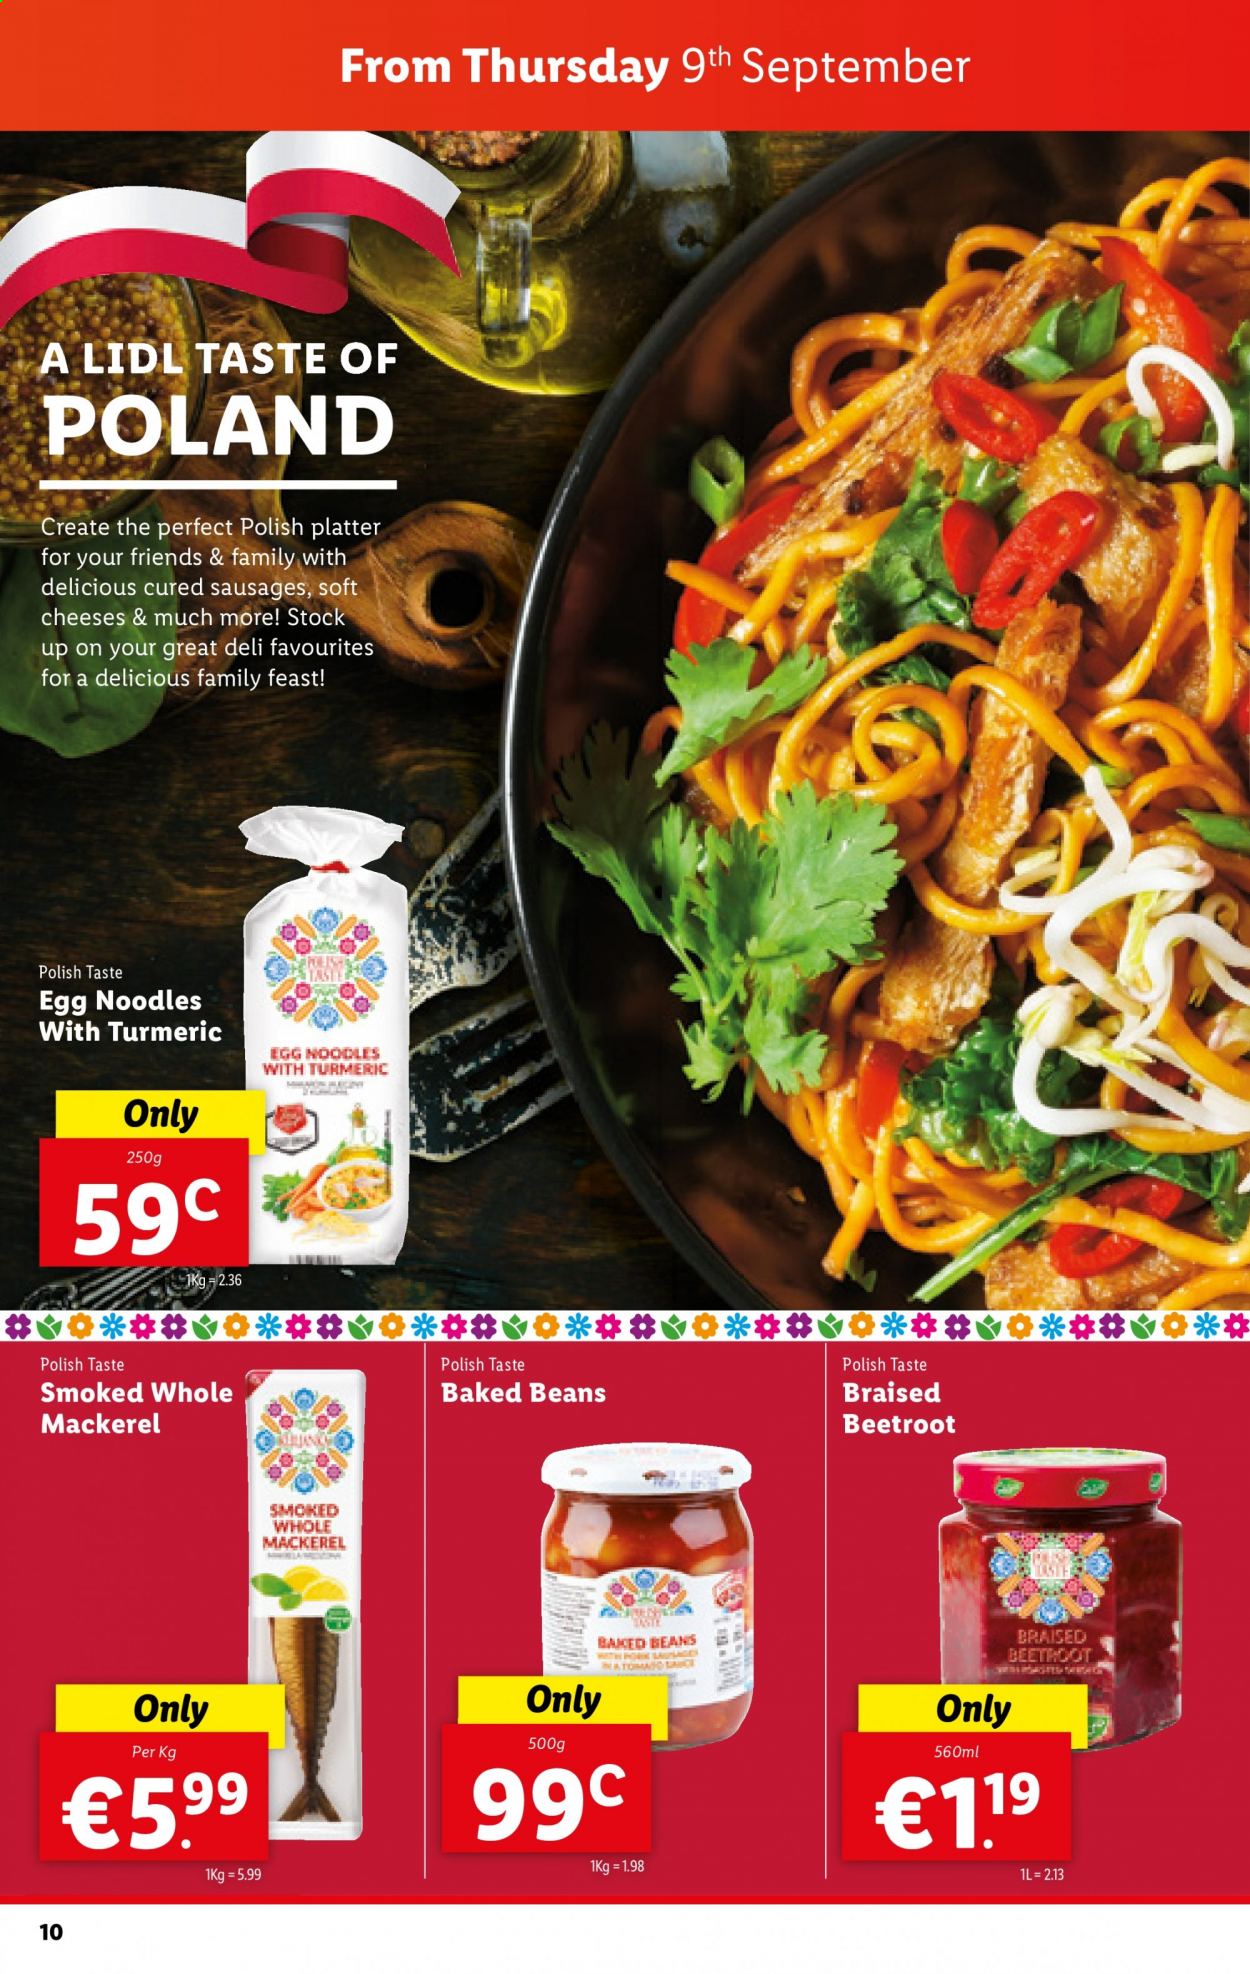 thumbnail - Lidl offer  - 09.09.2021 - 15.09.2021 - Sales products - beans, beetroot, mackerel, noodles, sausage, cheese, baked beans, egg noodles, turmeric, polish. Page 10.